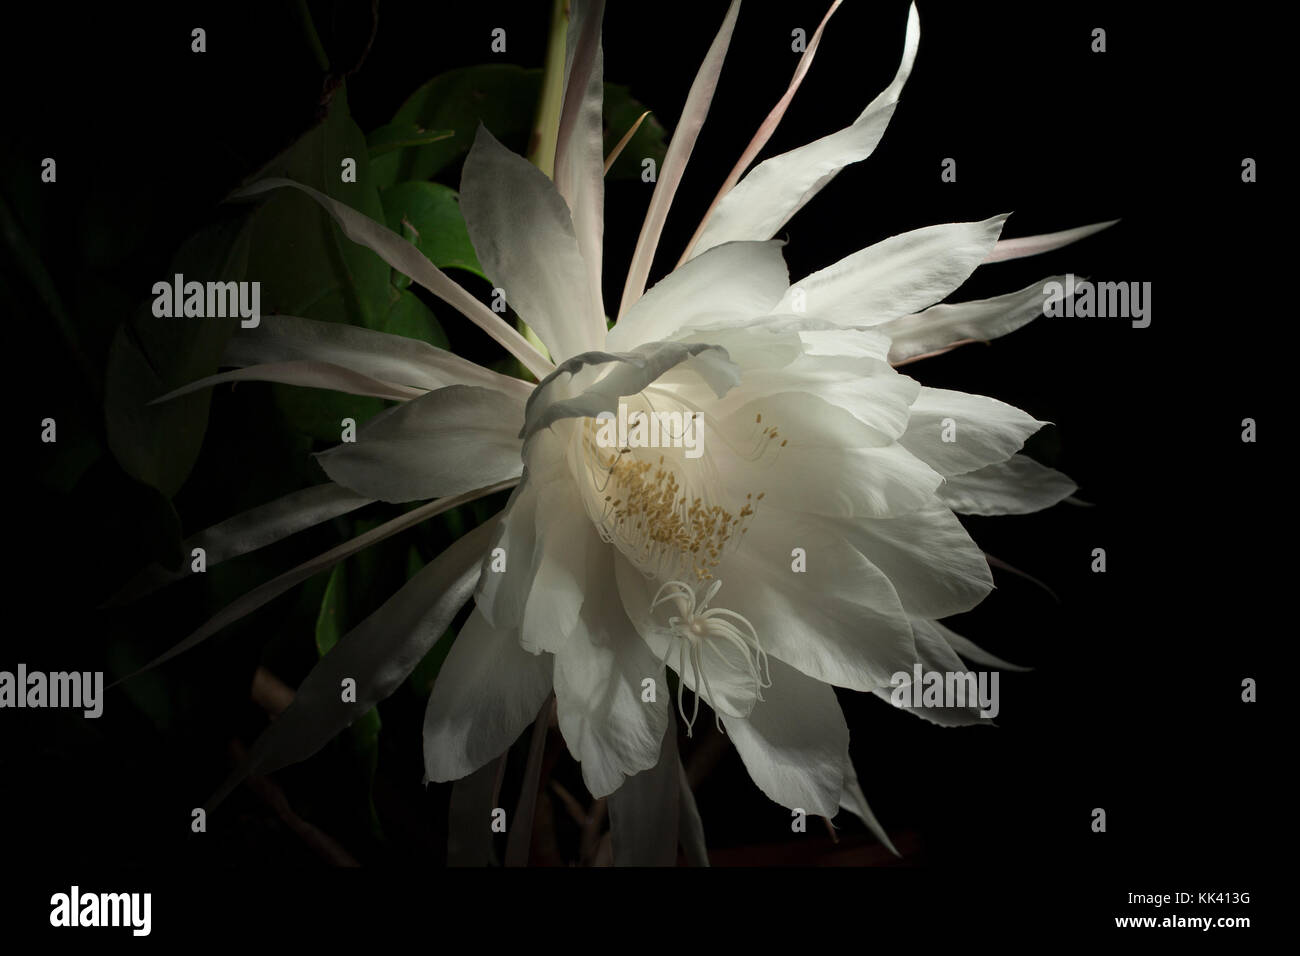 The night blooming cereus blooms usually only once a year and the blossoms last only for one night. Stock Photo